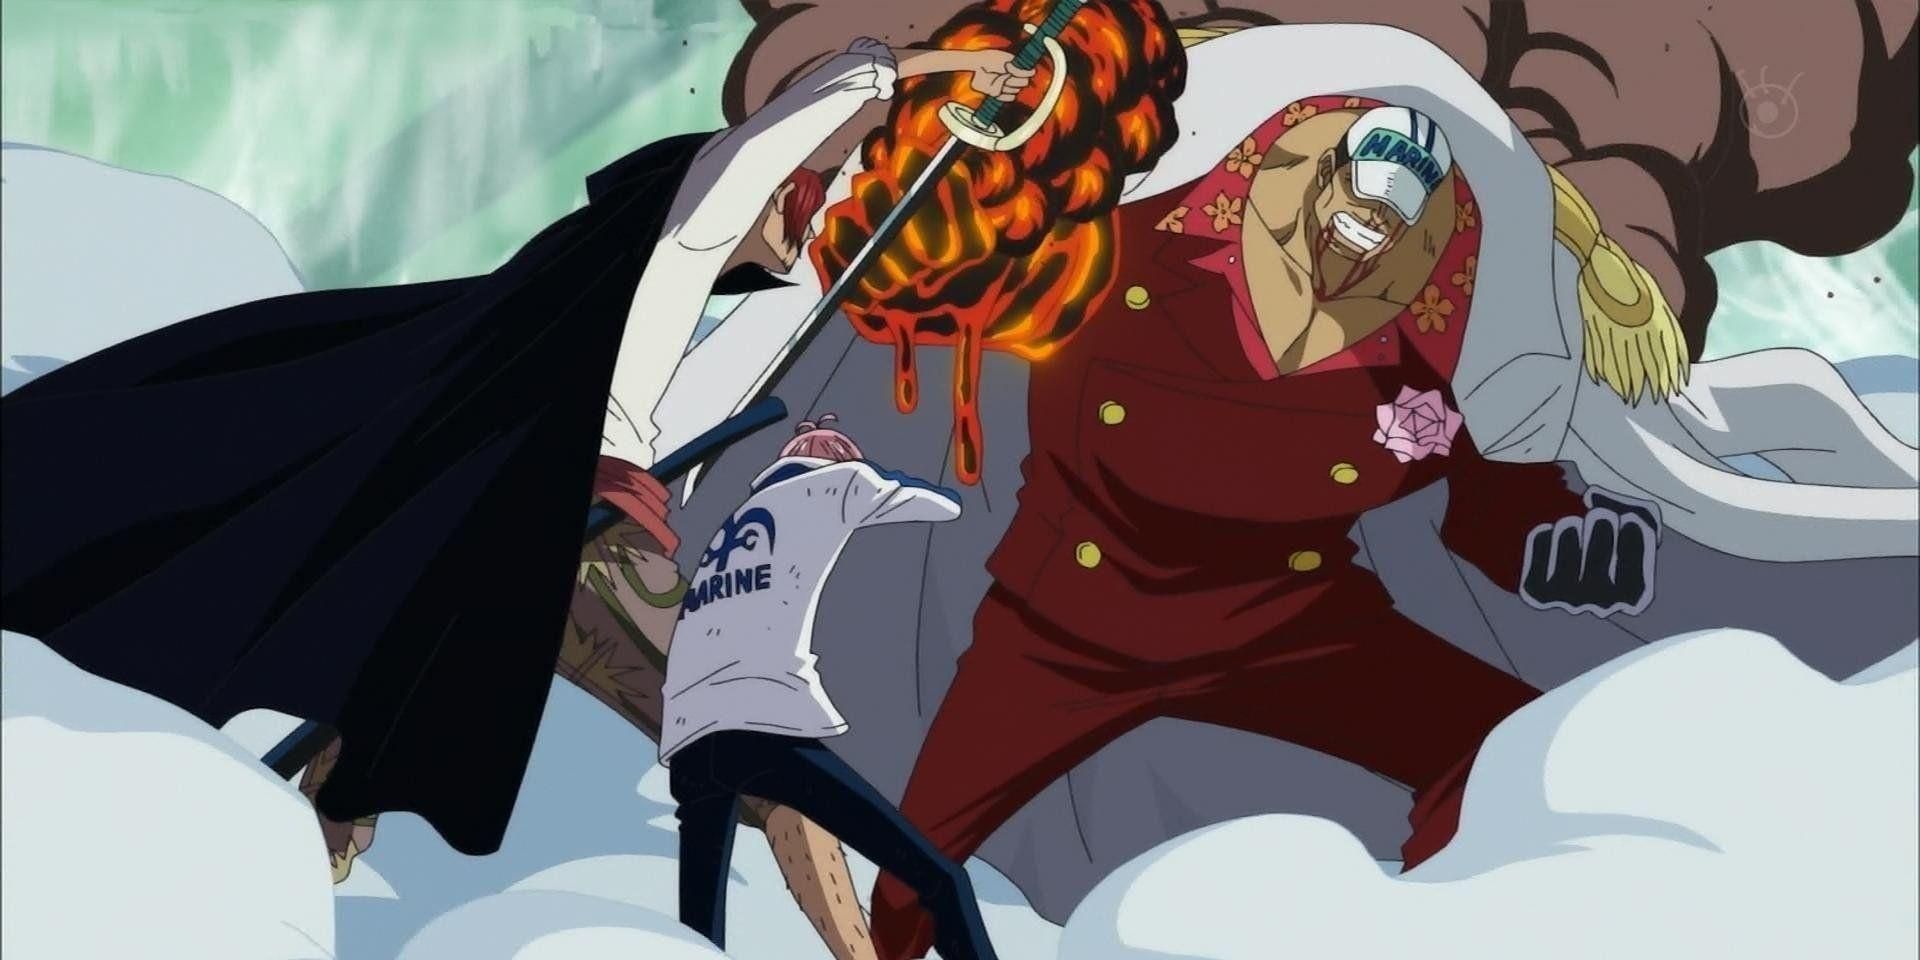 Shanks saves the young Marine, Coby, from being demolished by Admiral Akainu during One Piece's Summit War